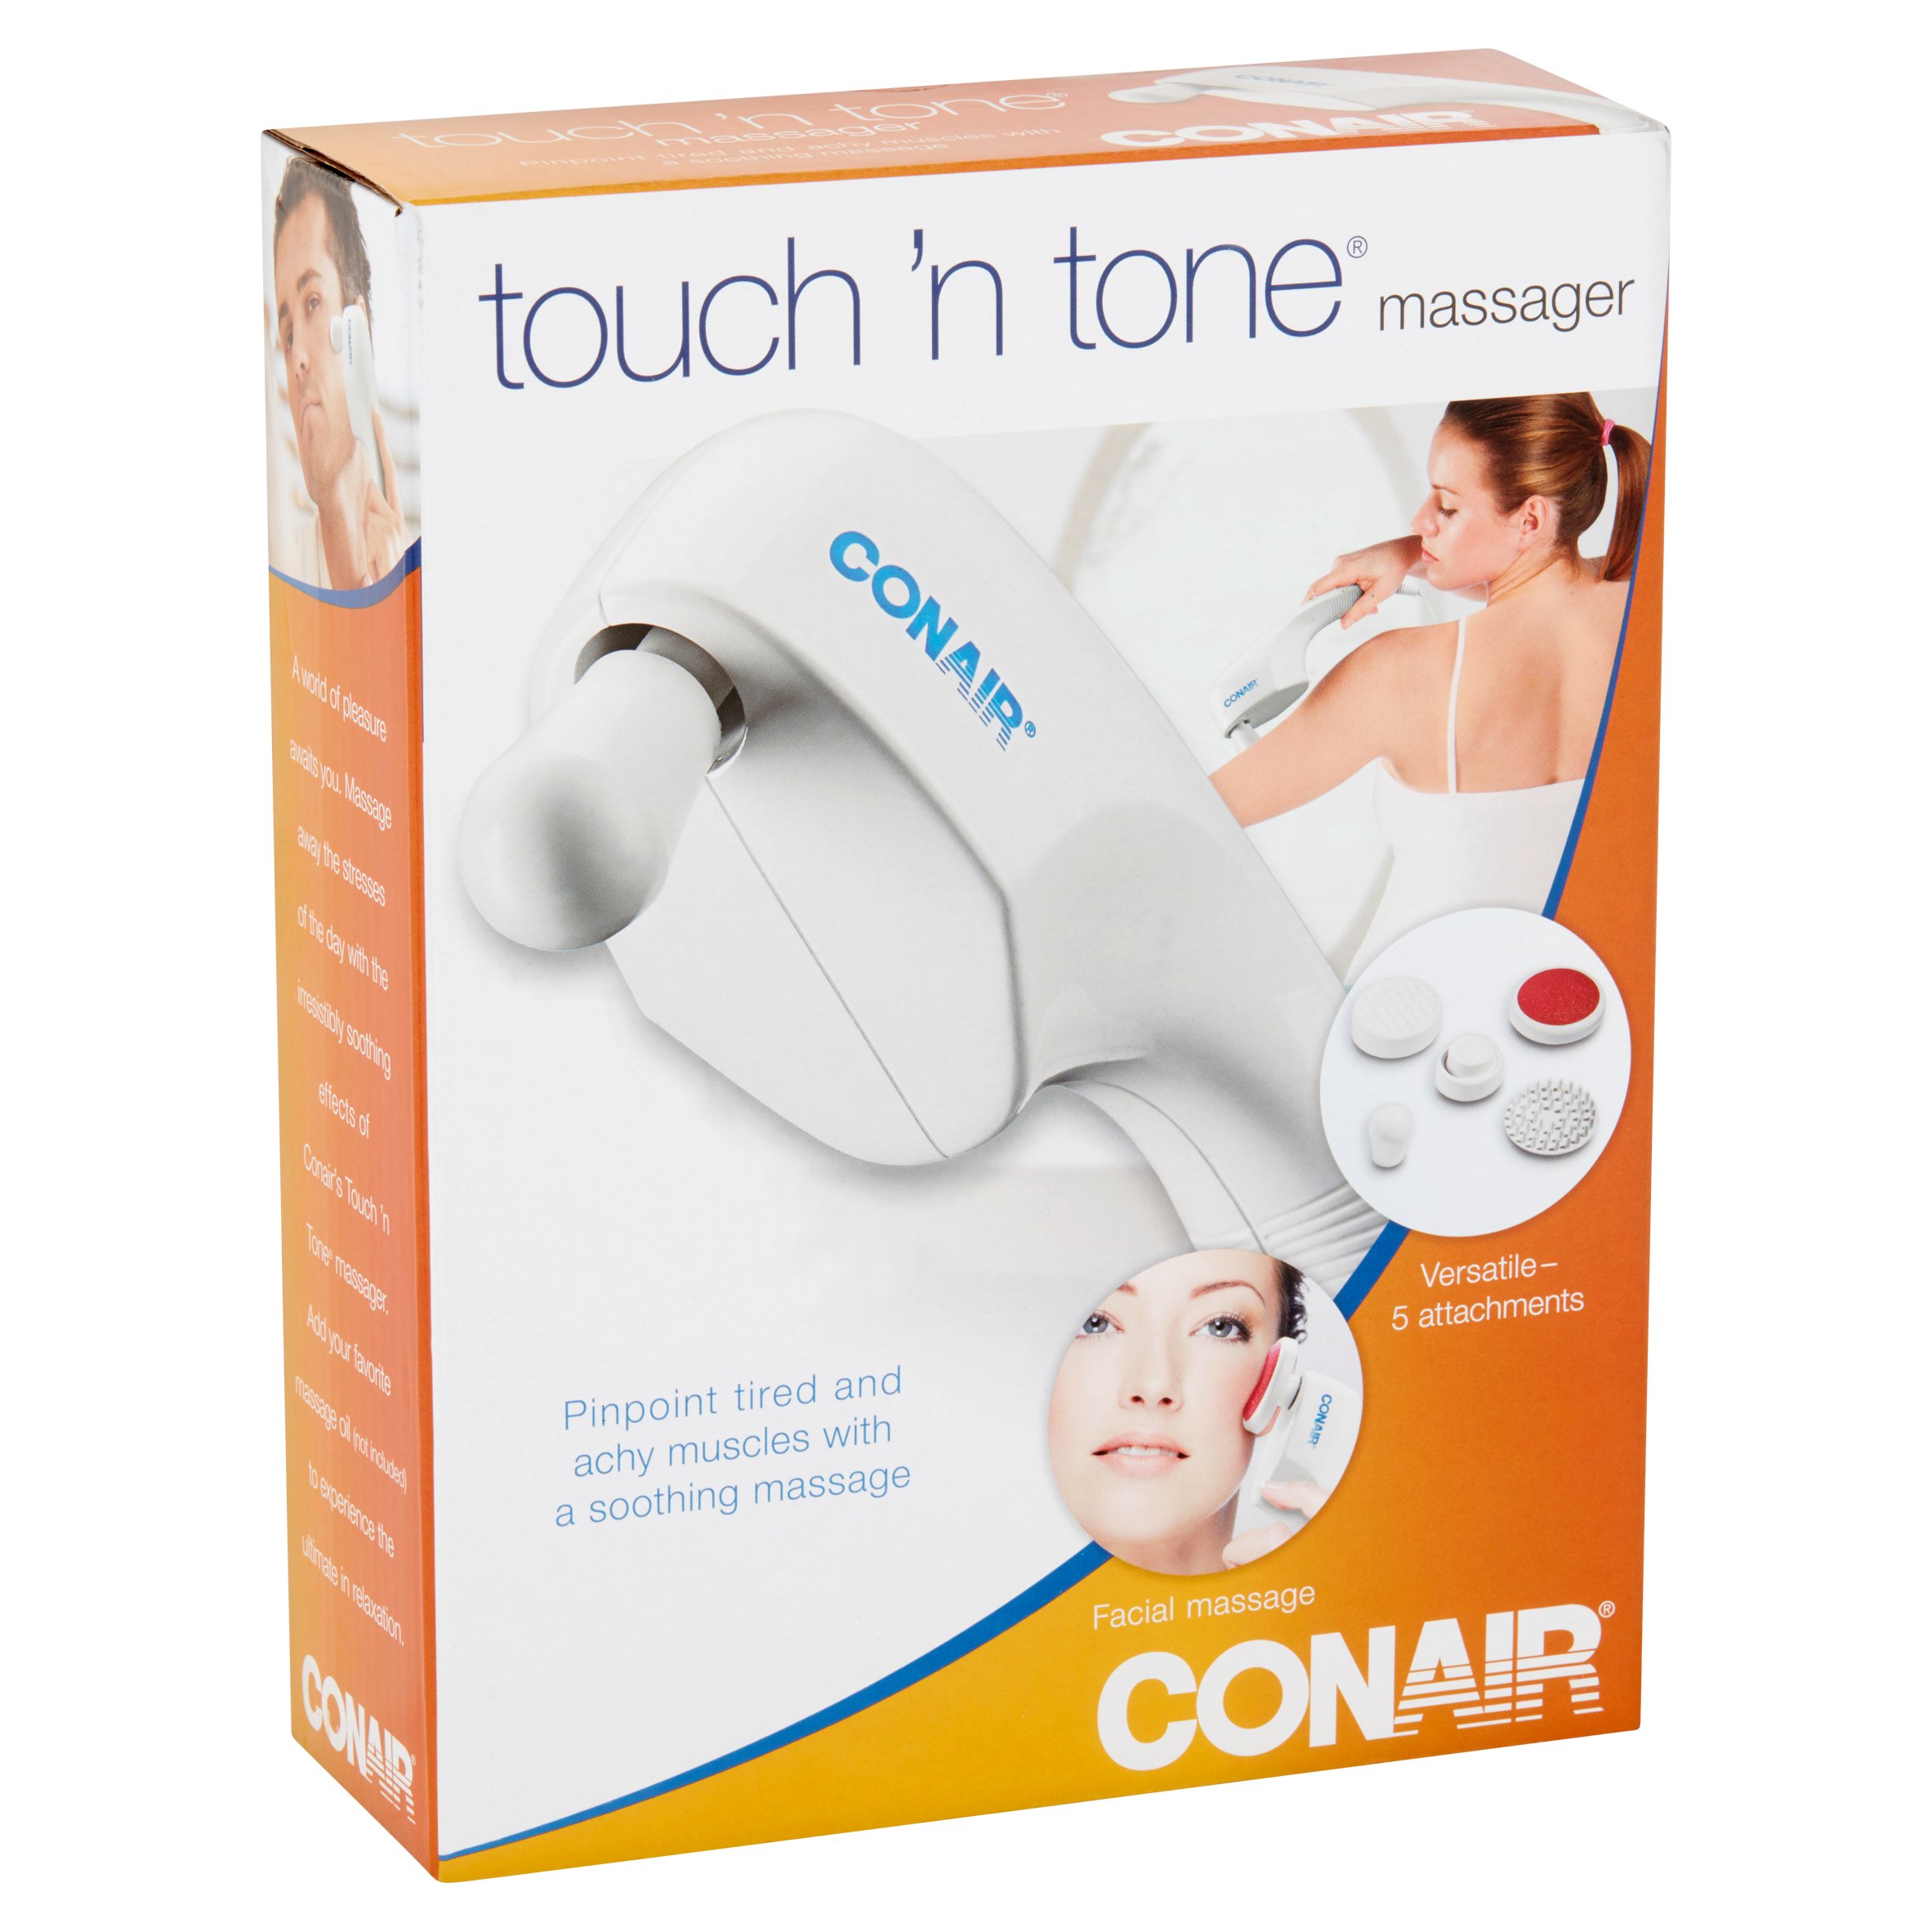 Conair® Touch N Tone® Massager - image 2 of 4